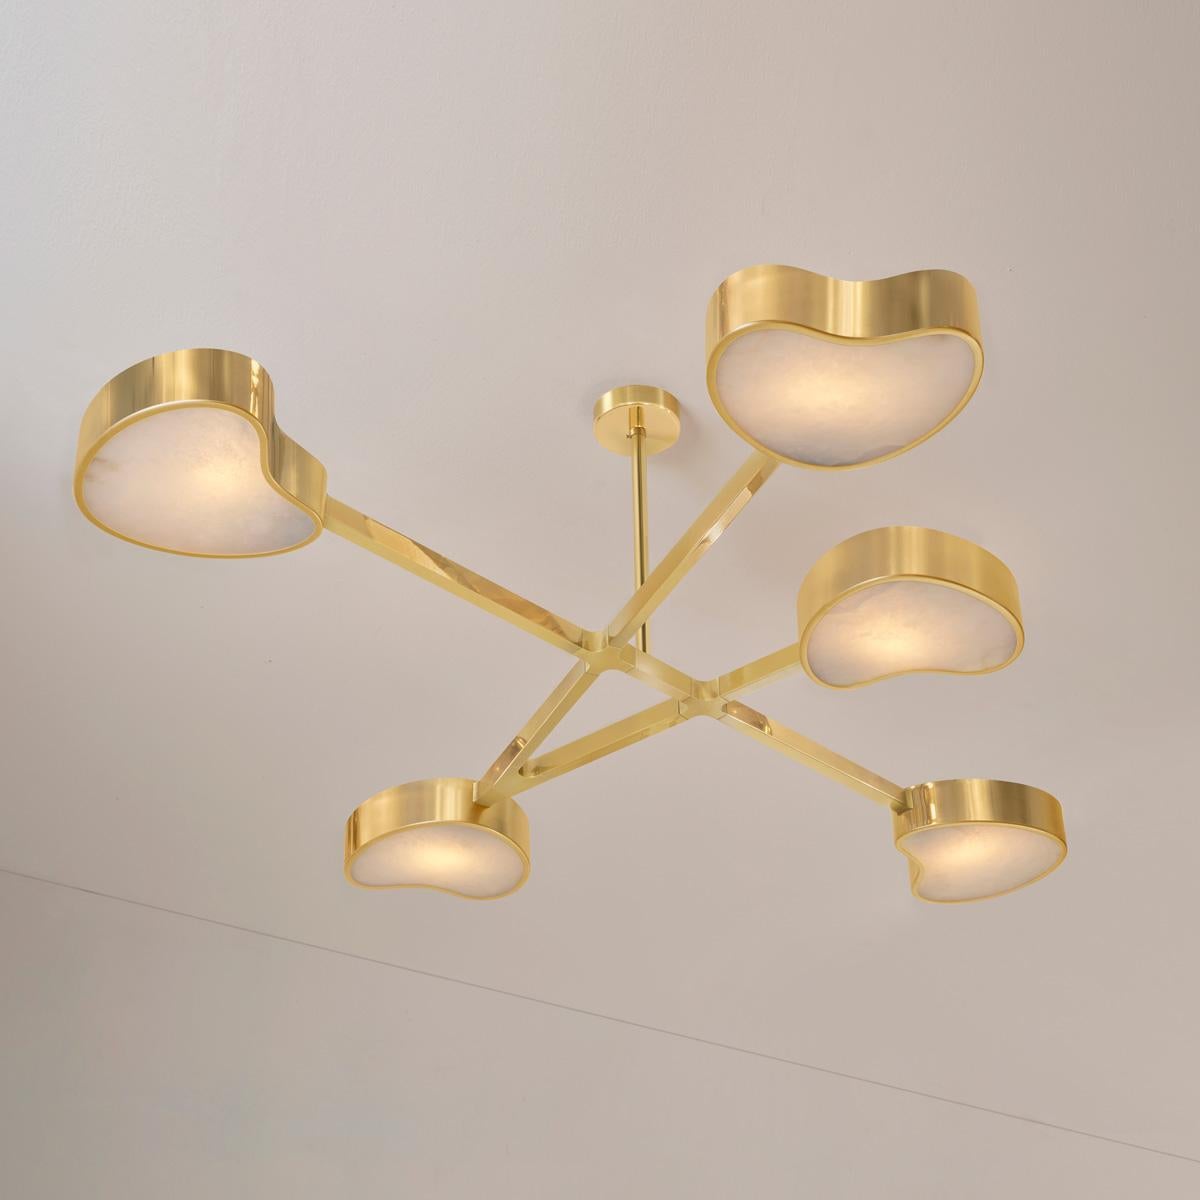 Cuore N.5 Ceiling Light by Gaspare Asaro. Satin Brass and Sand White Finish For Sale 4